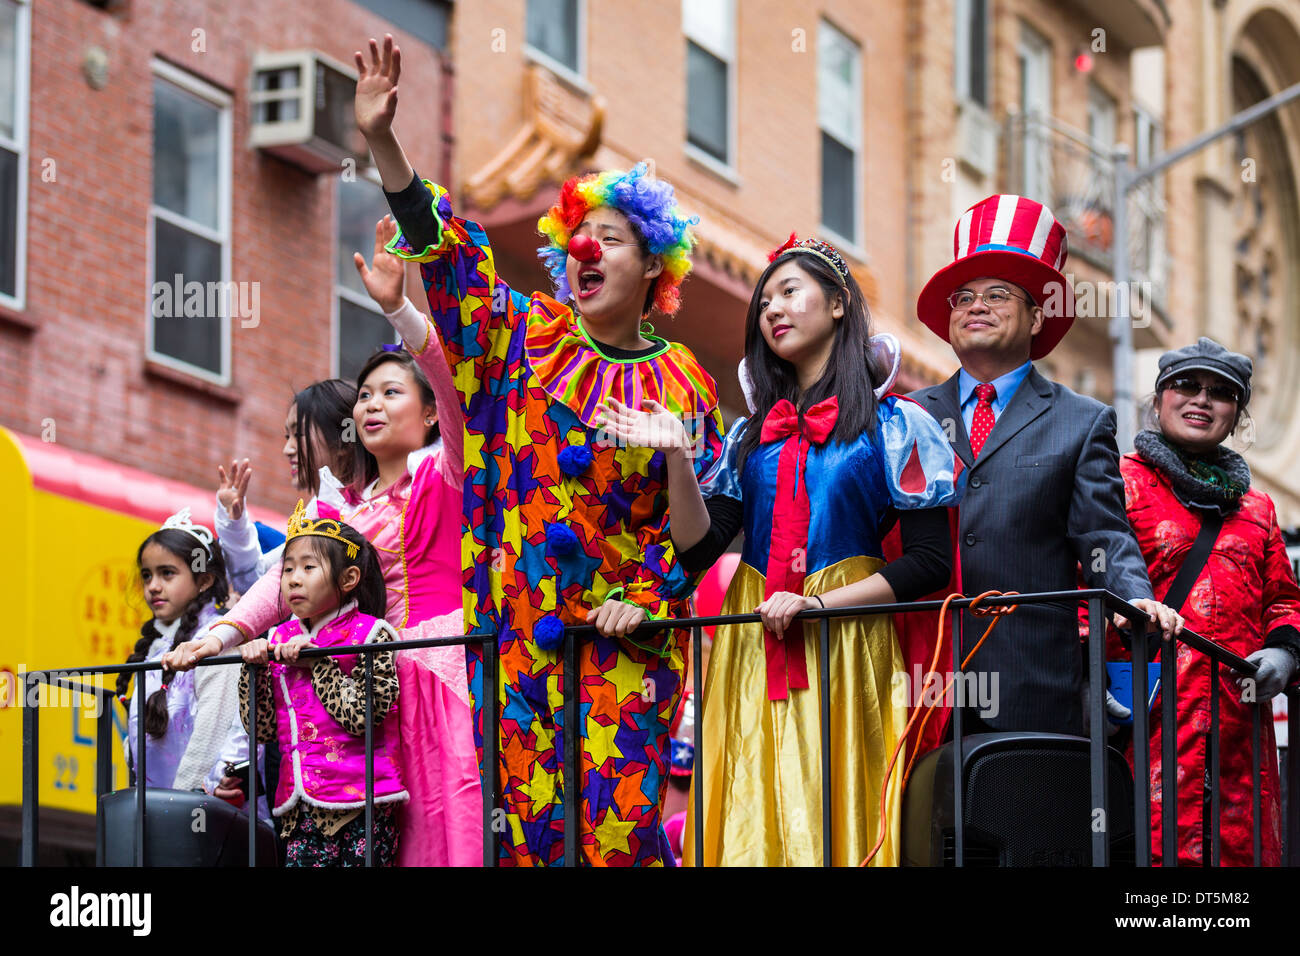 Young man dressed in a clown costume salutes the crowd at the Lunar New Year Festival in Chinatown Stock Photo